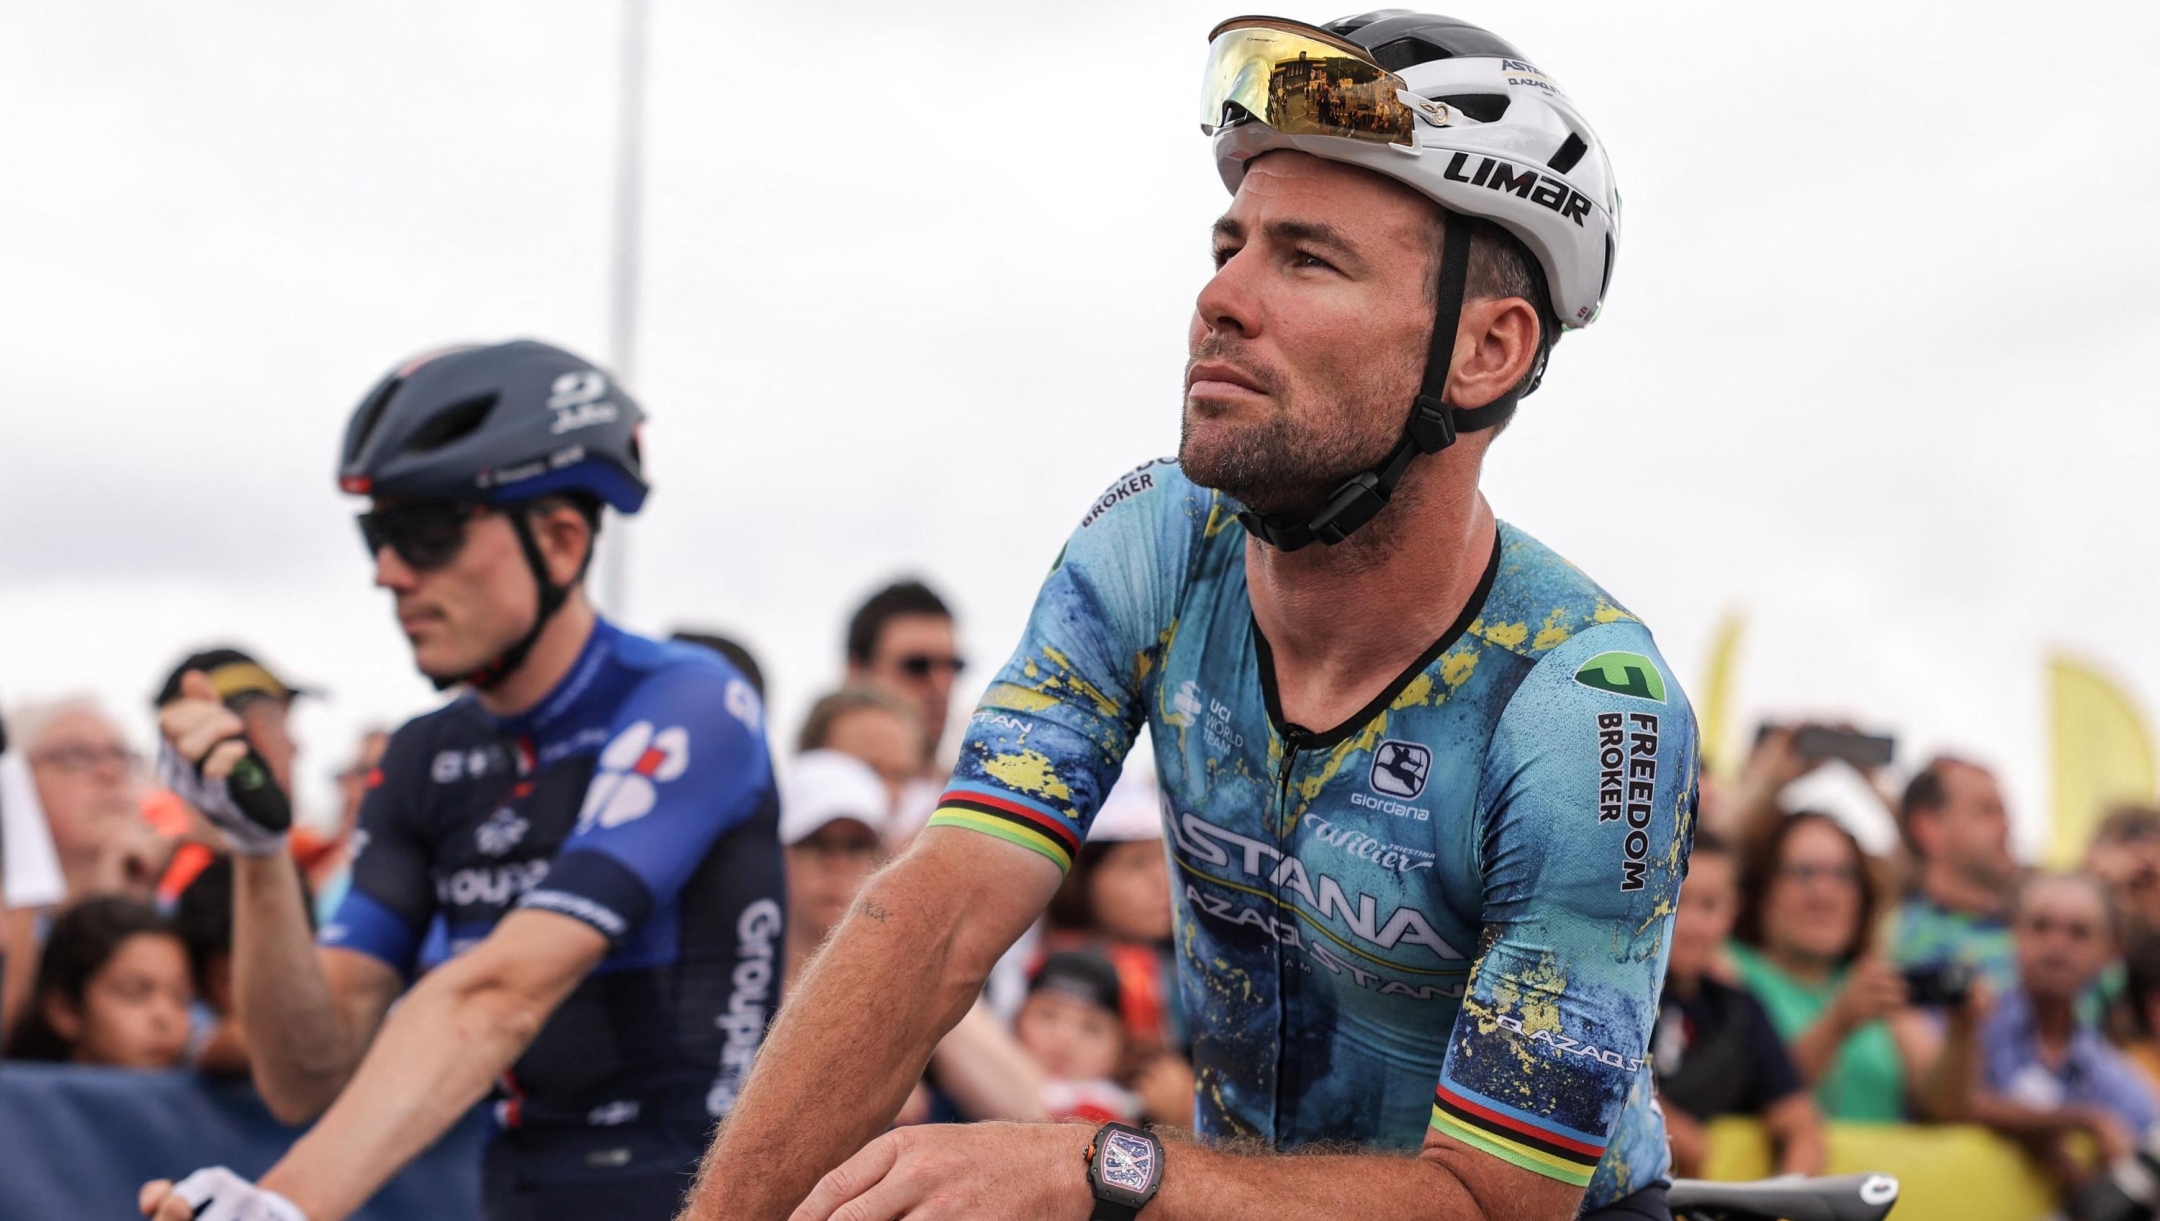 Astana Qazaqstan Team's British rider Marc Cavendish awaits the start of the 3rd stage of the 110th edition of the Tour de France cycling race, 193,5 km between Amorebieta-Etxano in Northern Spain and Bayonne in southwestern France, on July 3, 2023. (Photo by Thomas SAMSON / AFP)